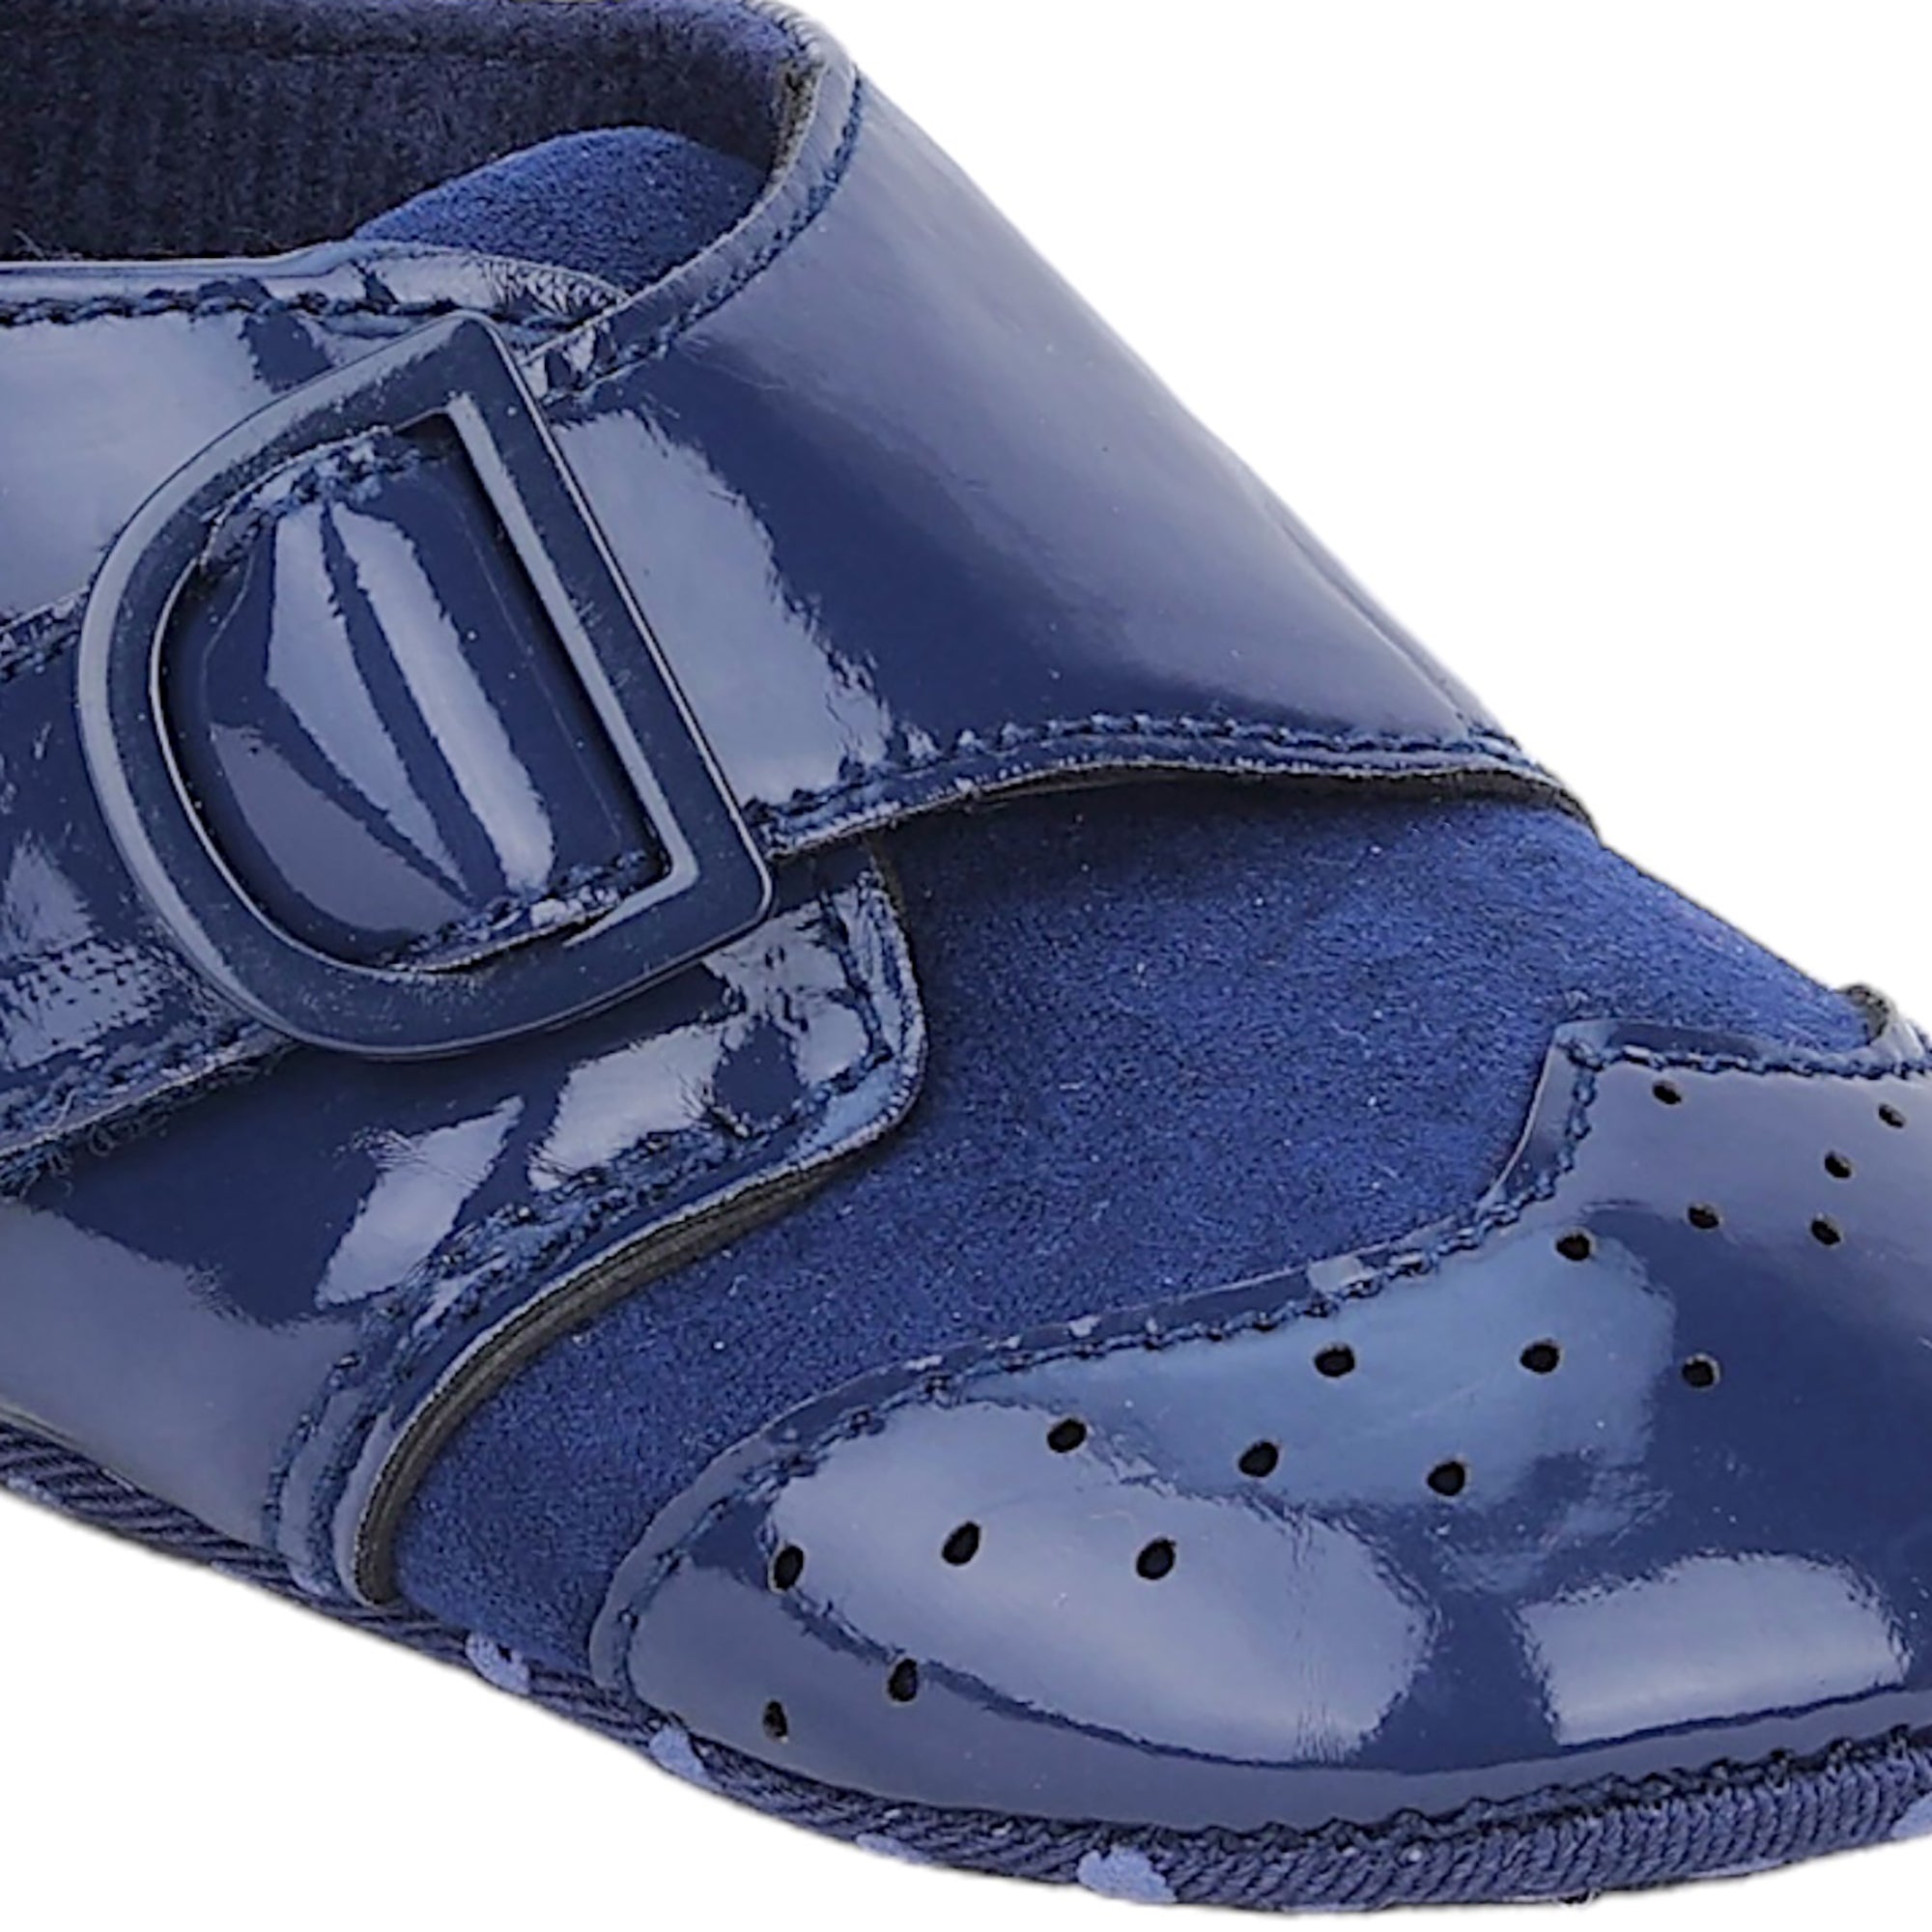 Baby Moo Breathable Buckle Closure Patent Leather Anti-Skid Ballerina Booties - Navy Blue